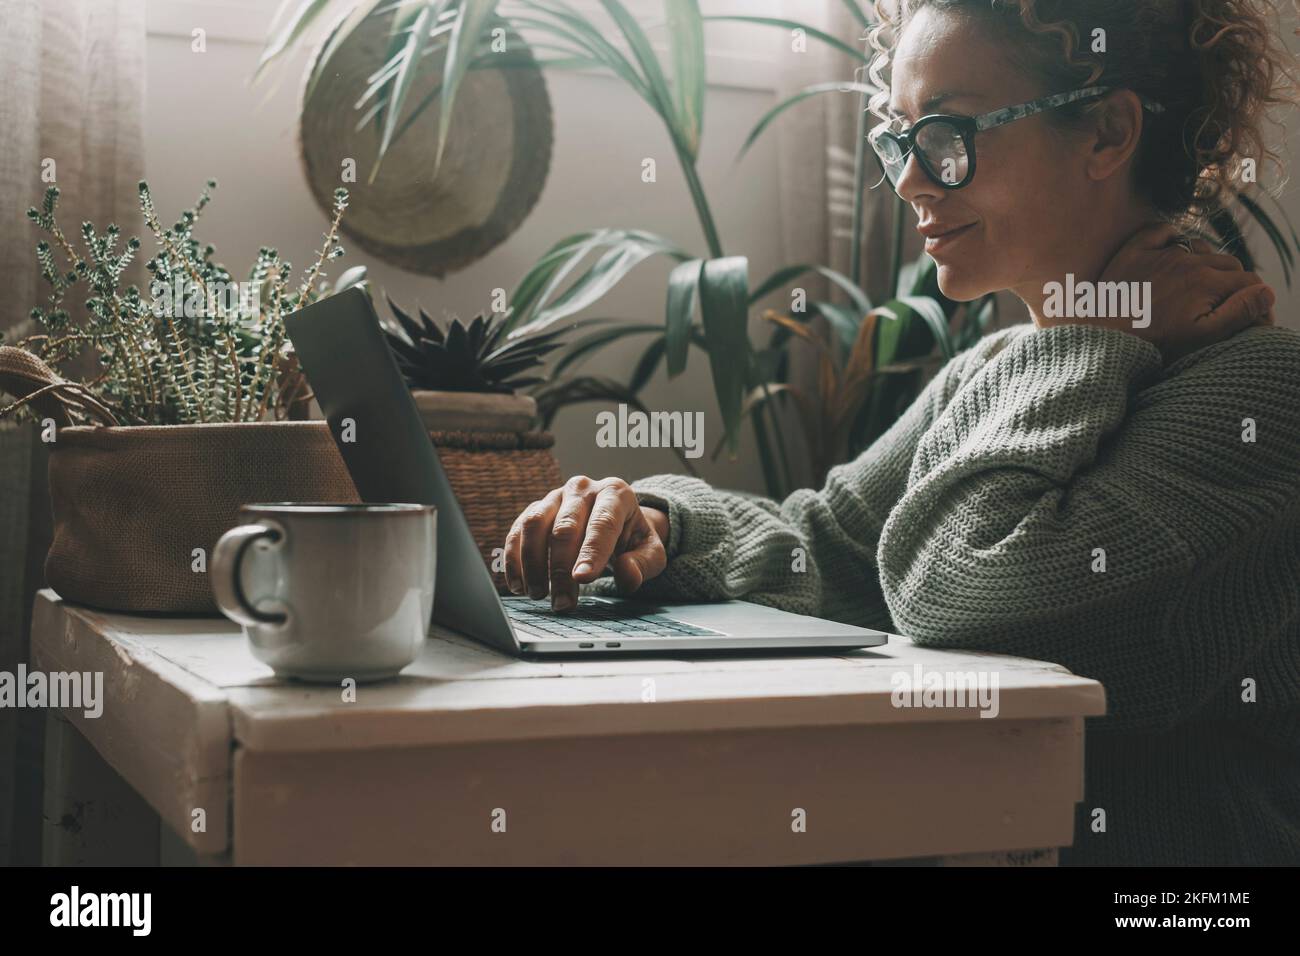 Happy and serene woman with eyeglasses surf the web on a computer at home. Green mood color. Plants in background. Adult female people working on lapt Stock Photo